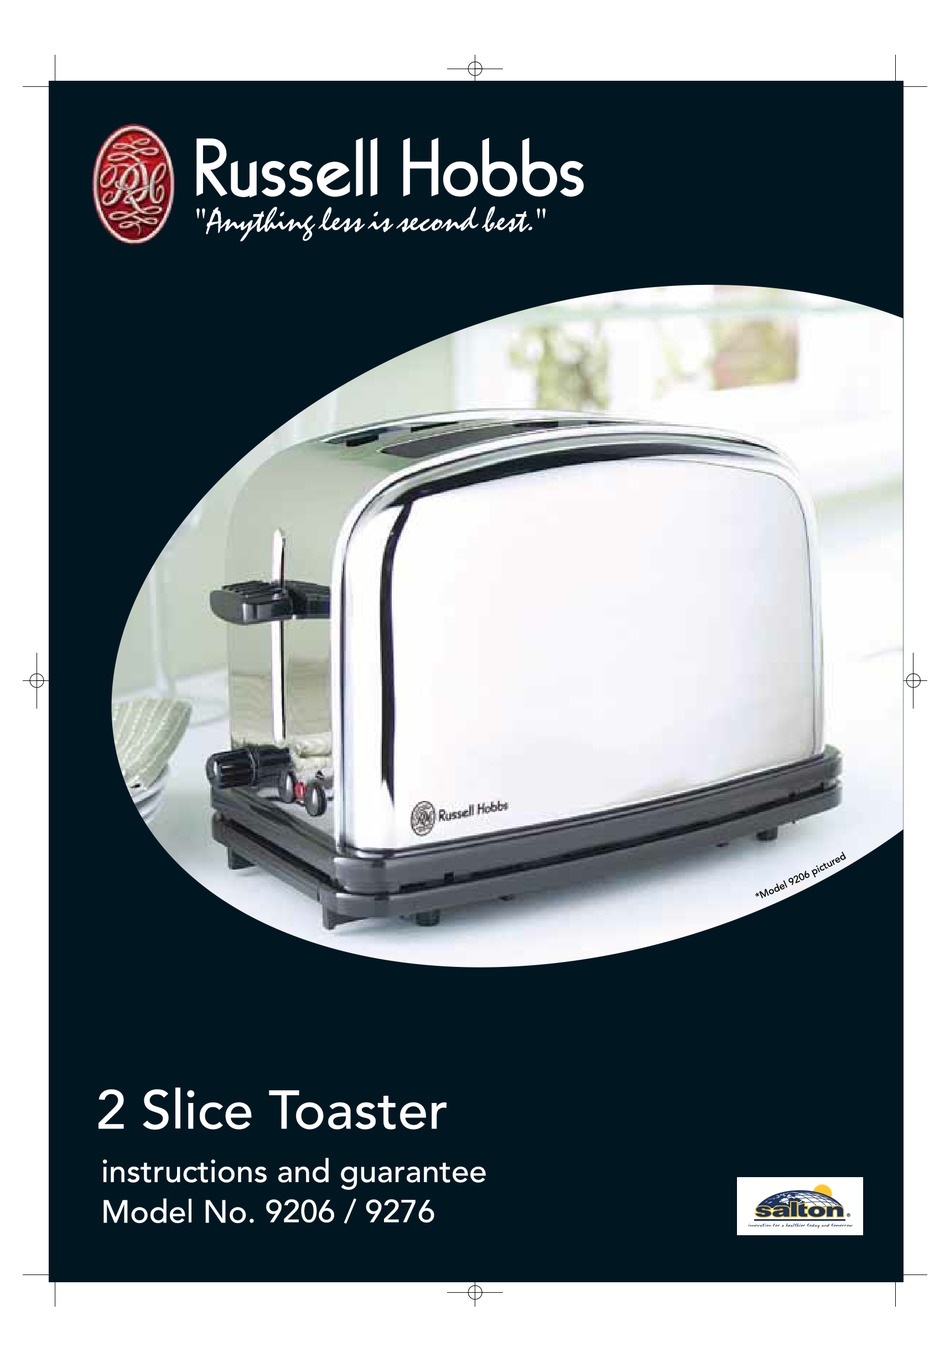 Russell Hobbs Colours Plus 2-Slice Toaster 1200 W In Heavenly Blue 23335 